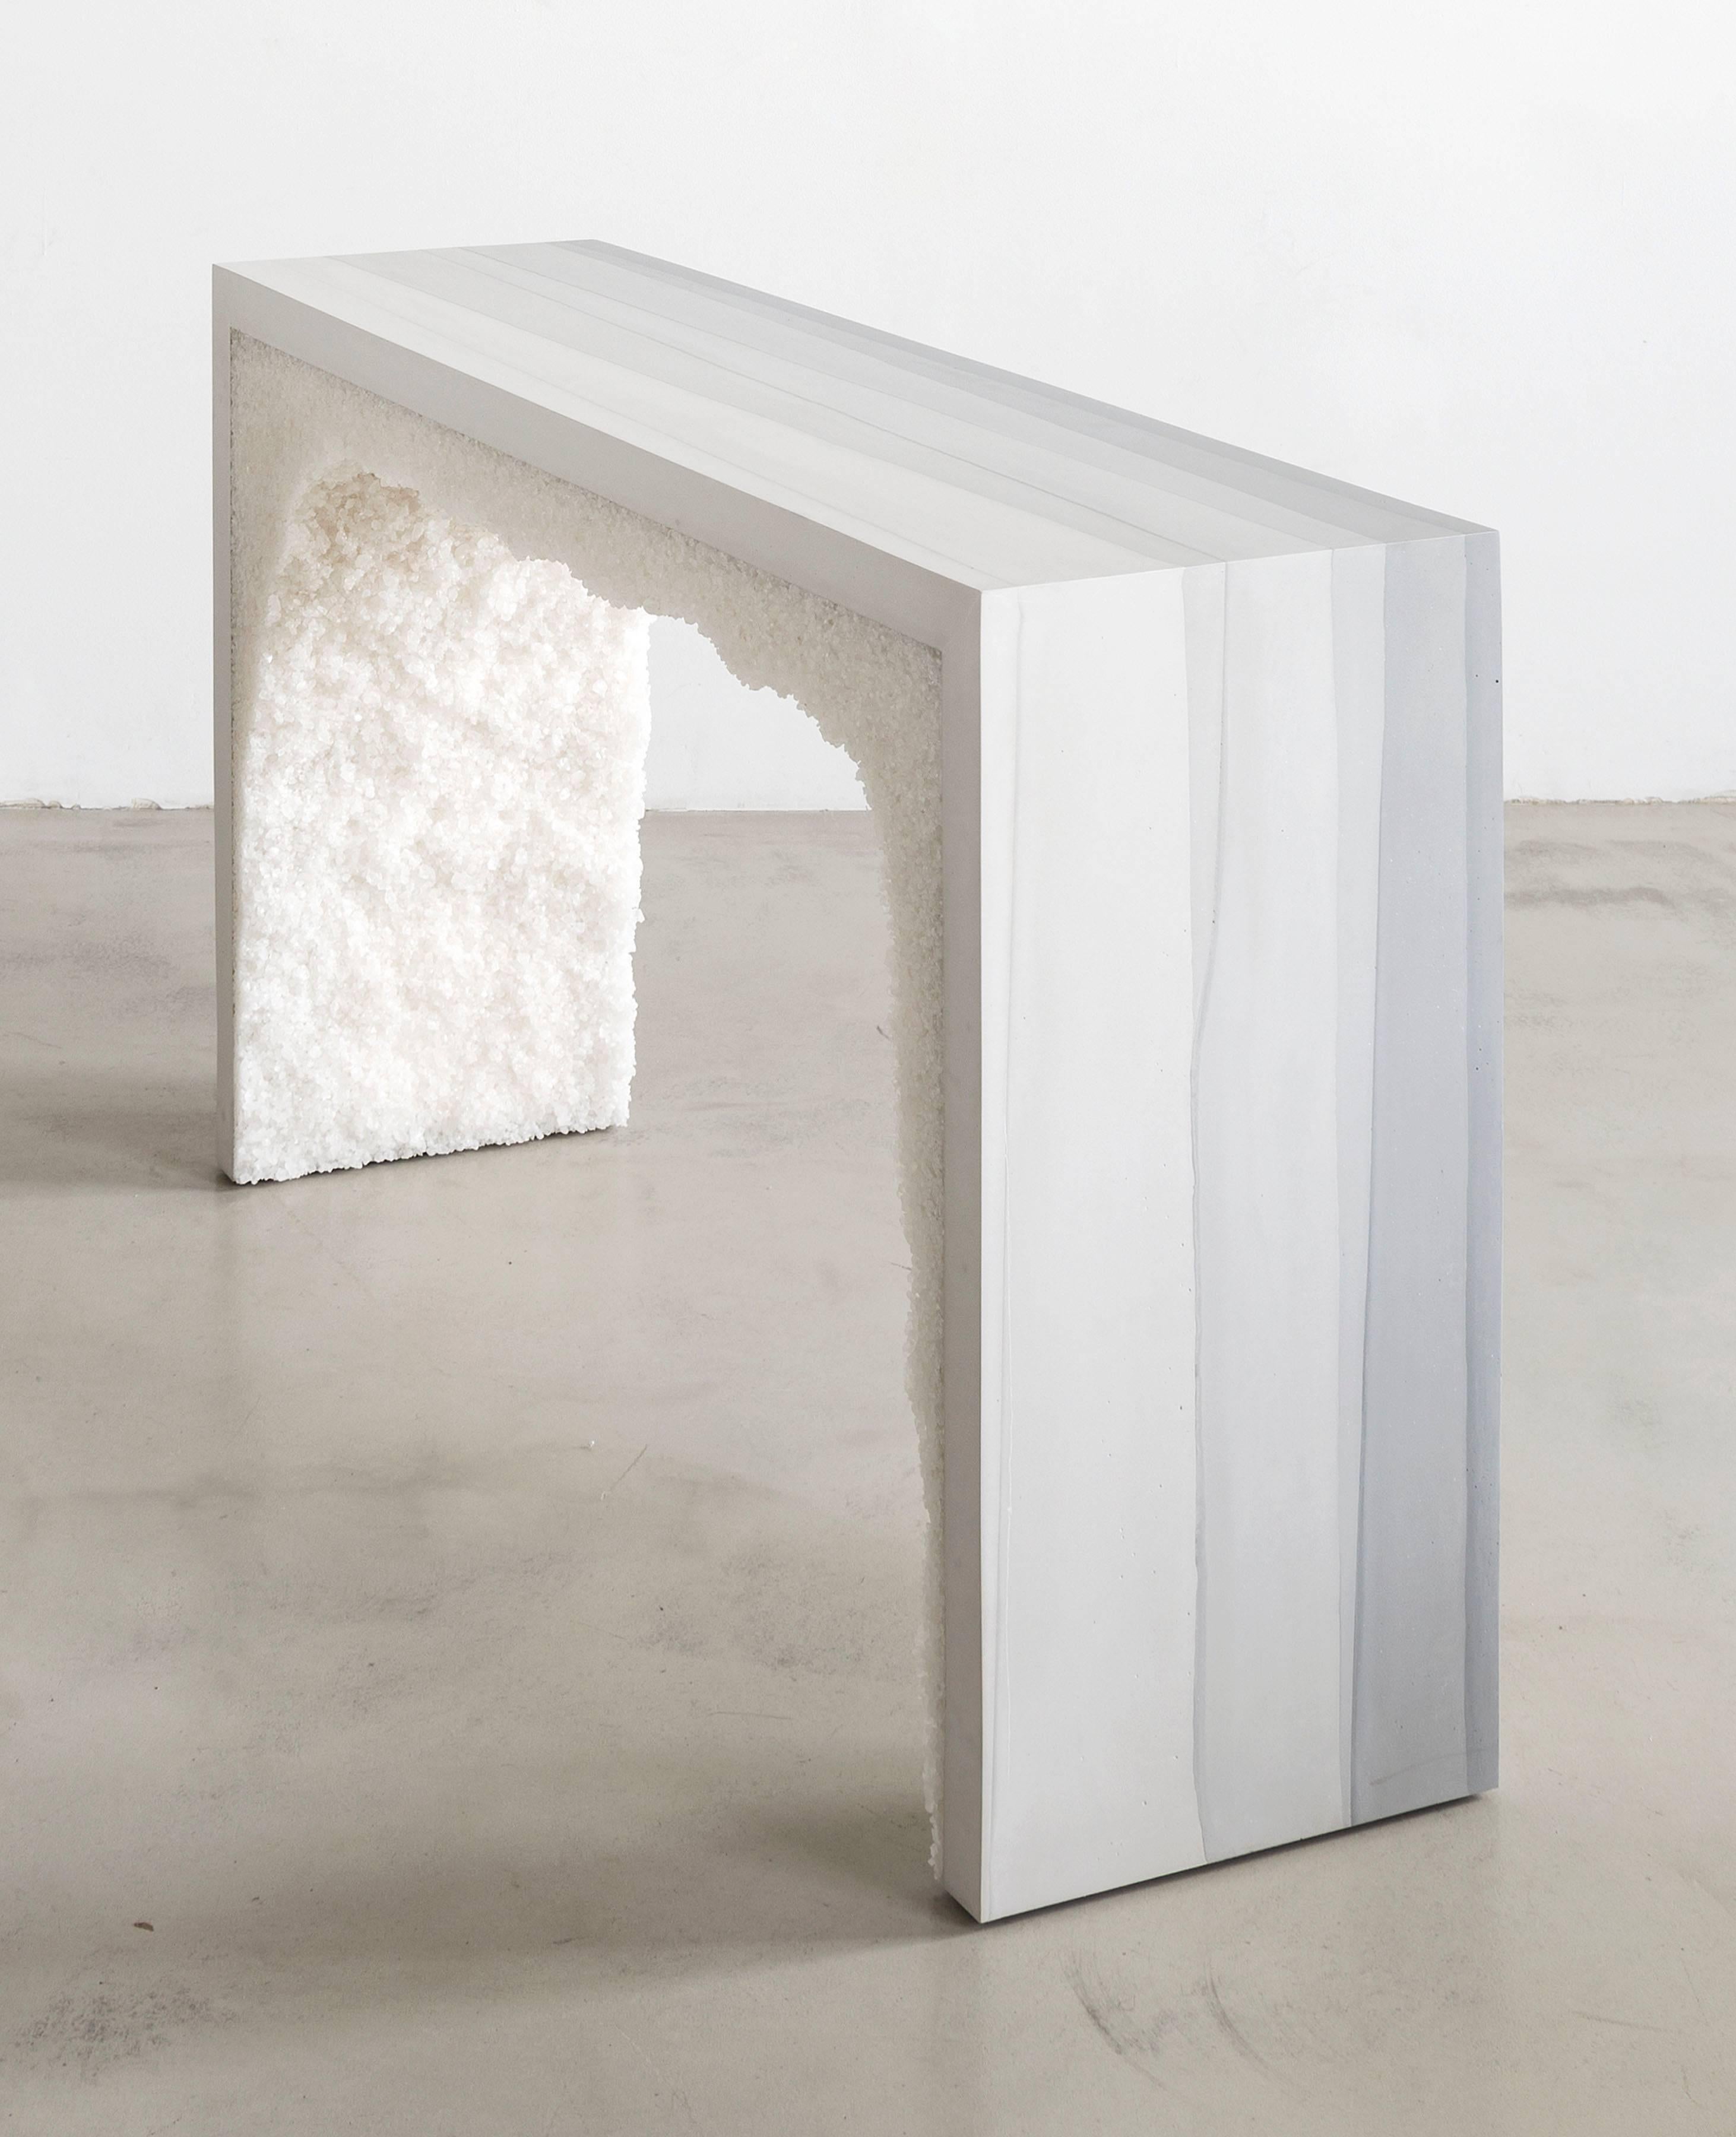 This console consists of a hand-dyed ombre cement exterior and a packed white rock salt interior. The silica is packed by hand within the cement in an organic nature. Custom options available, please inquire with the studio.